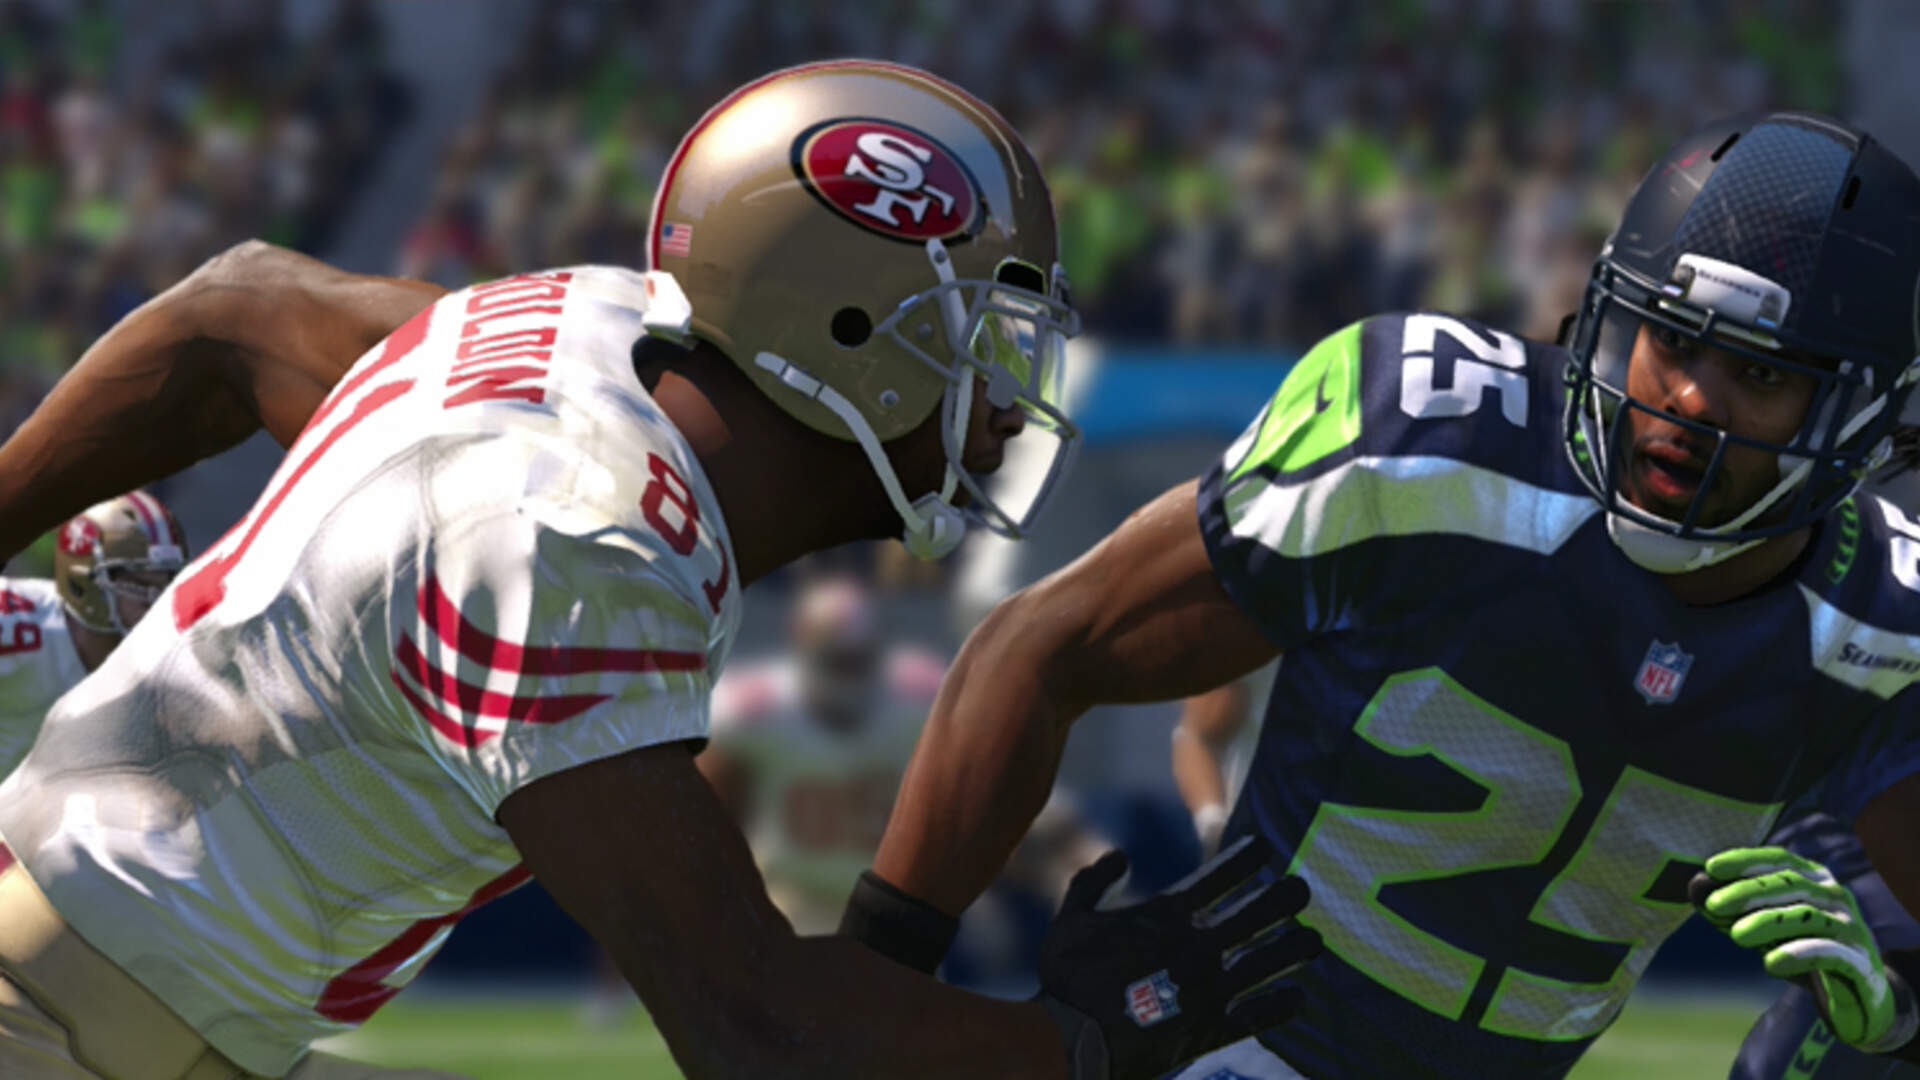 Madden NFL 15 PS4 Review: Madden